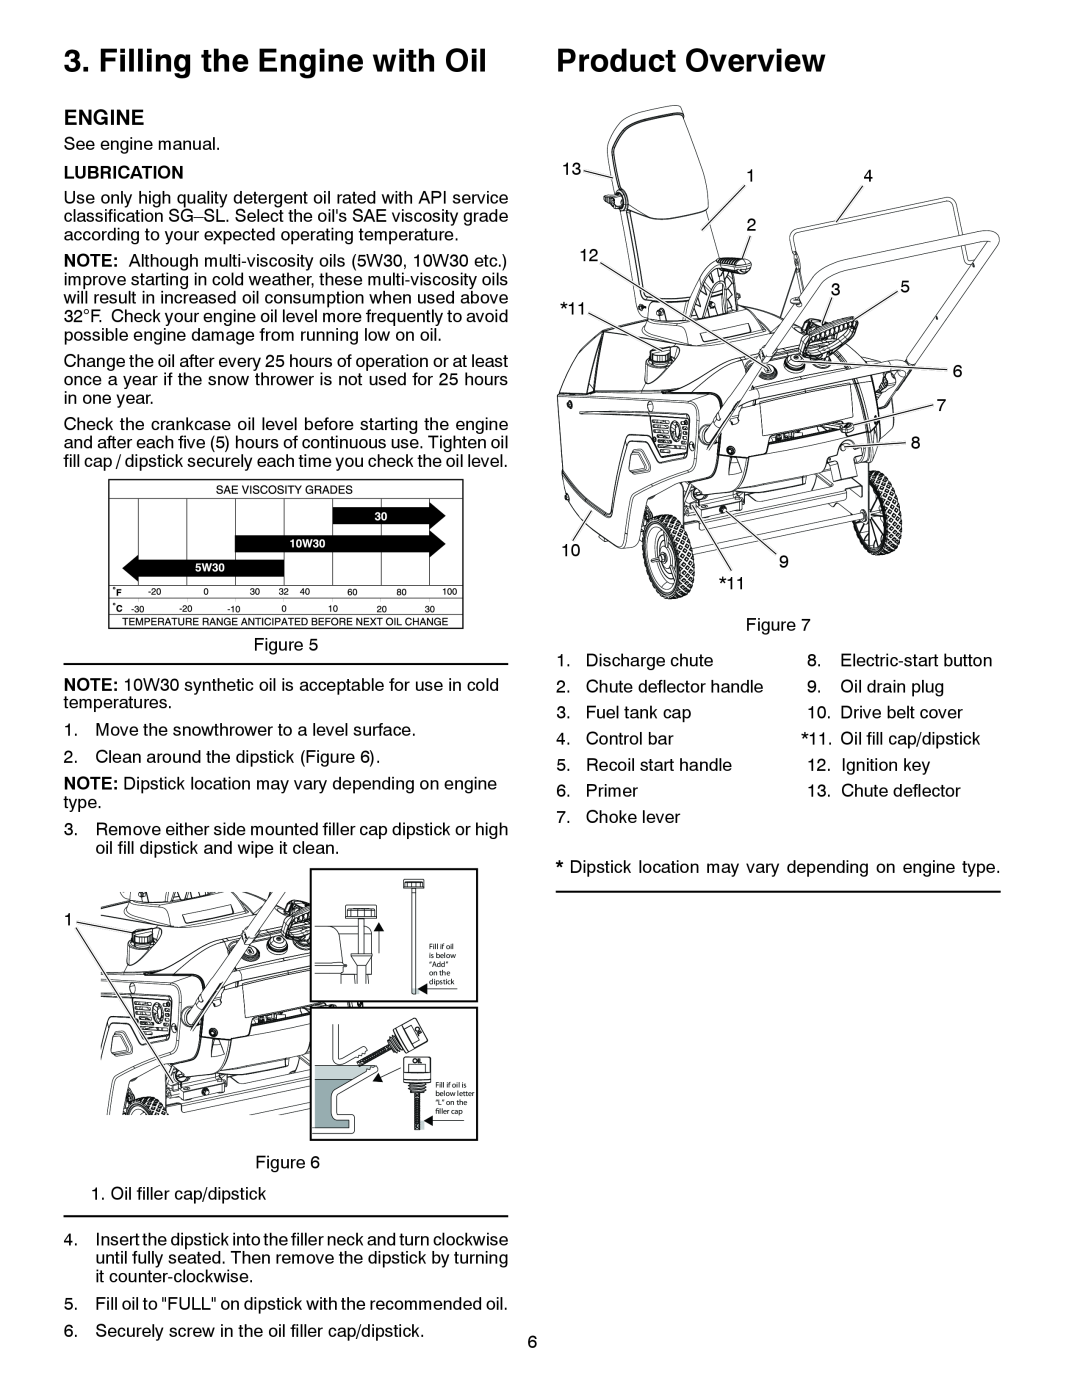 McCulloch MC621, 96182000500 owner manual Filling the Engine with Oil, Product Overview, Lubrication 